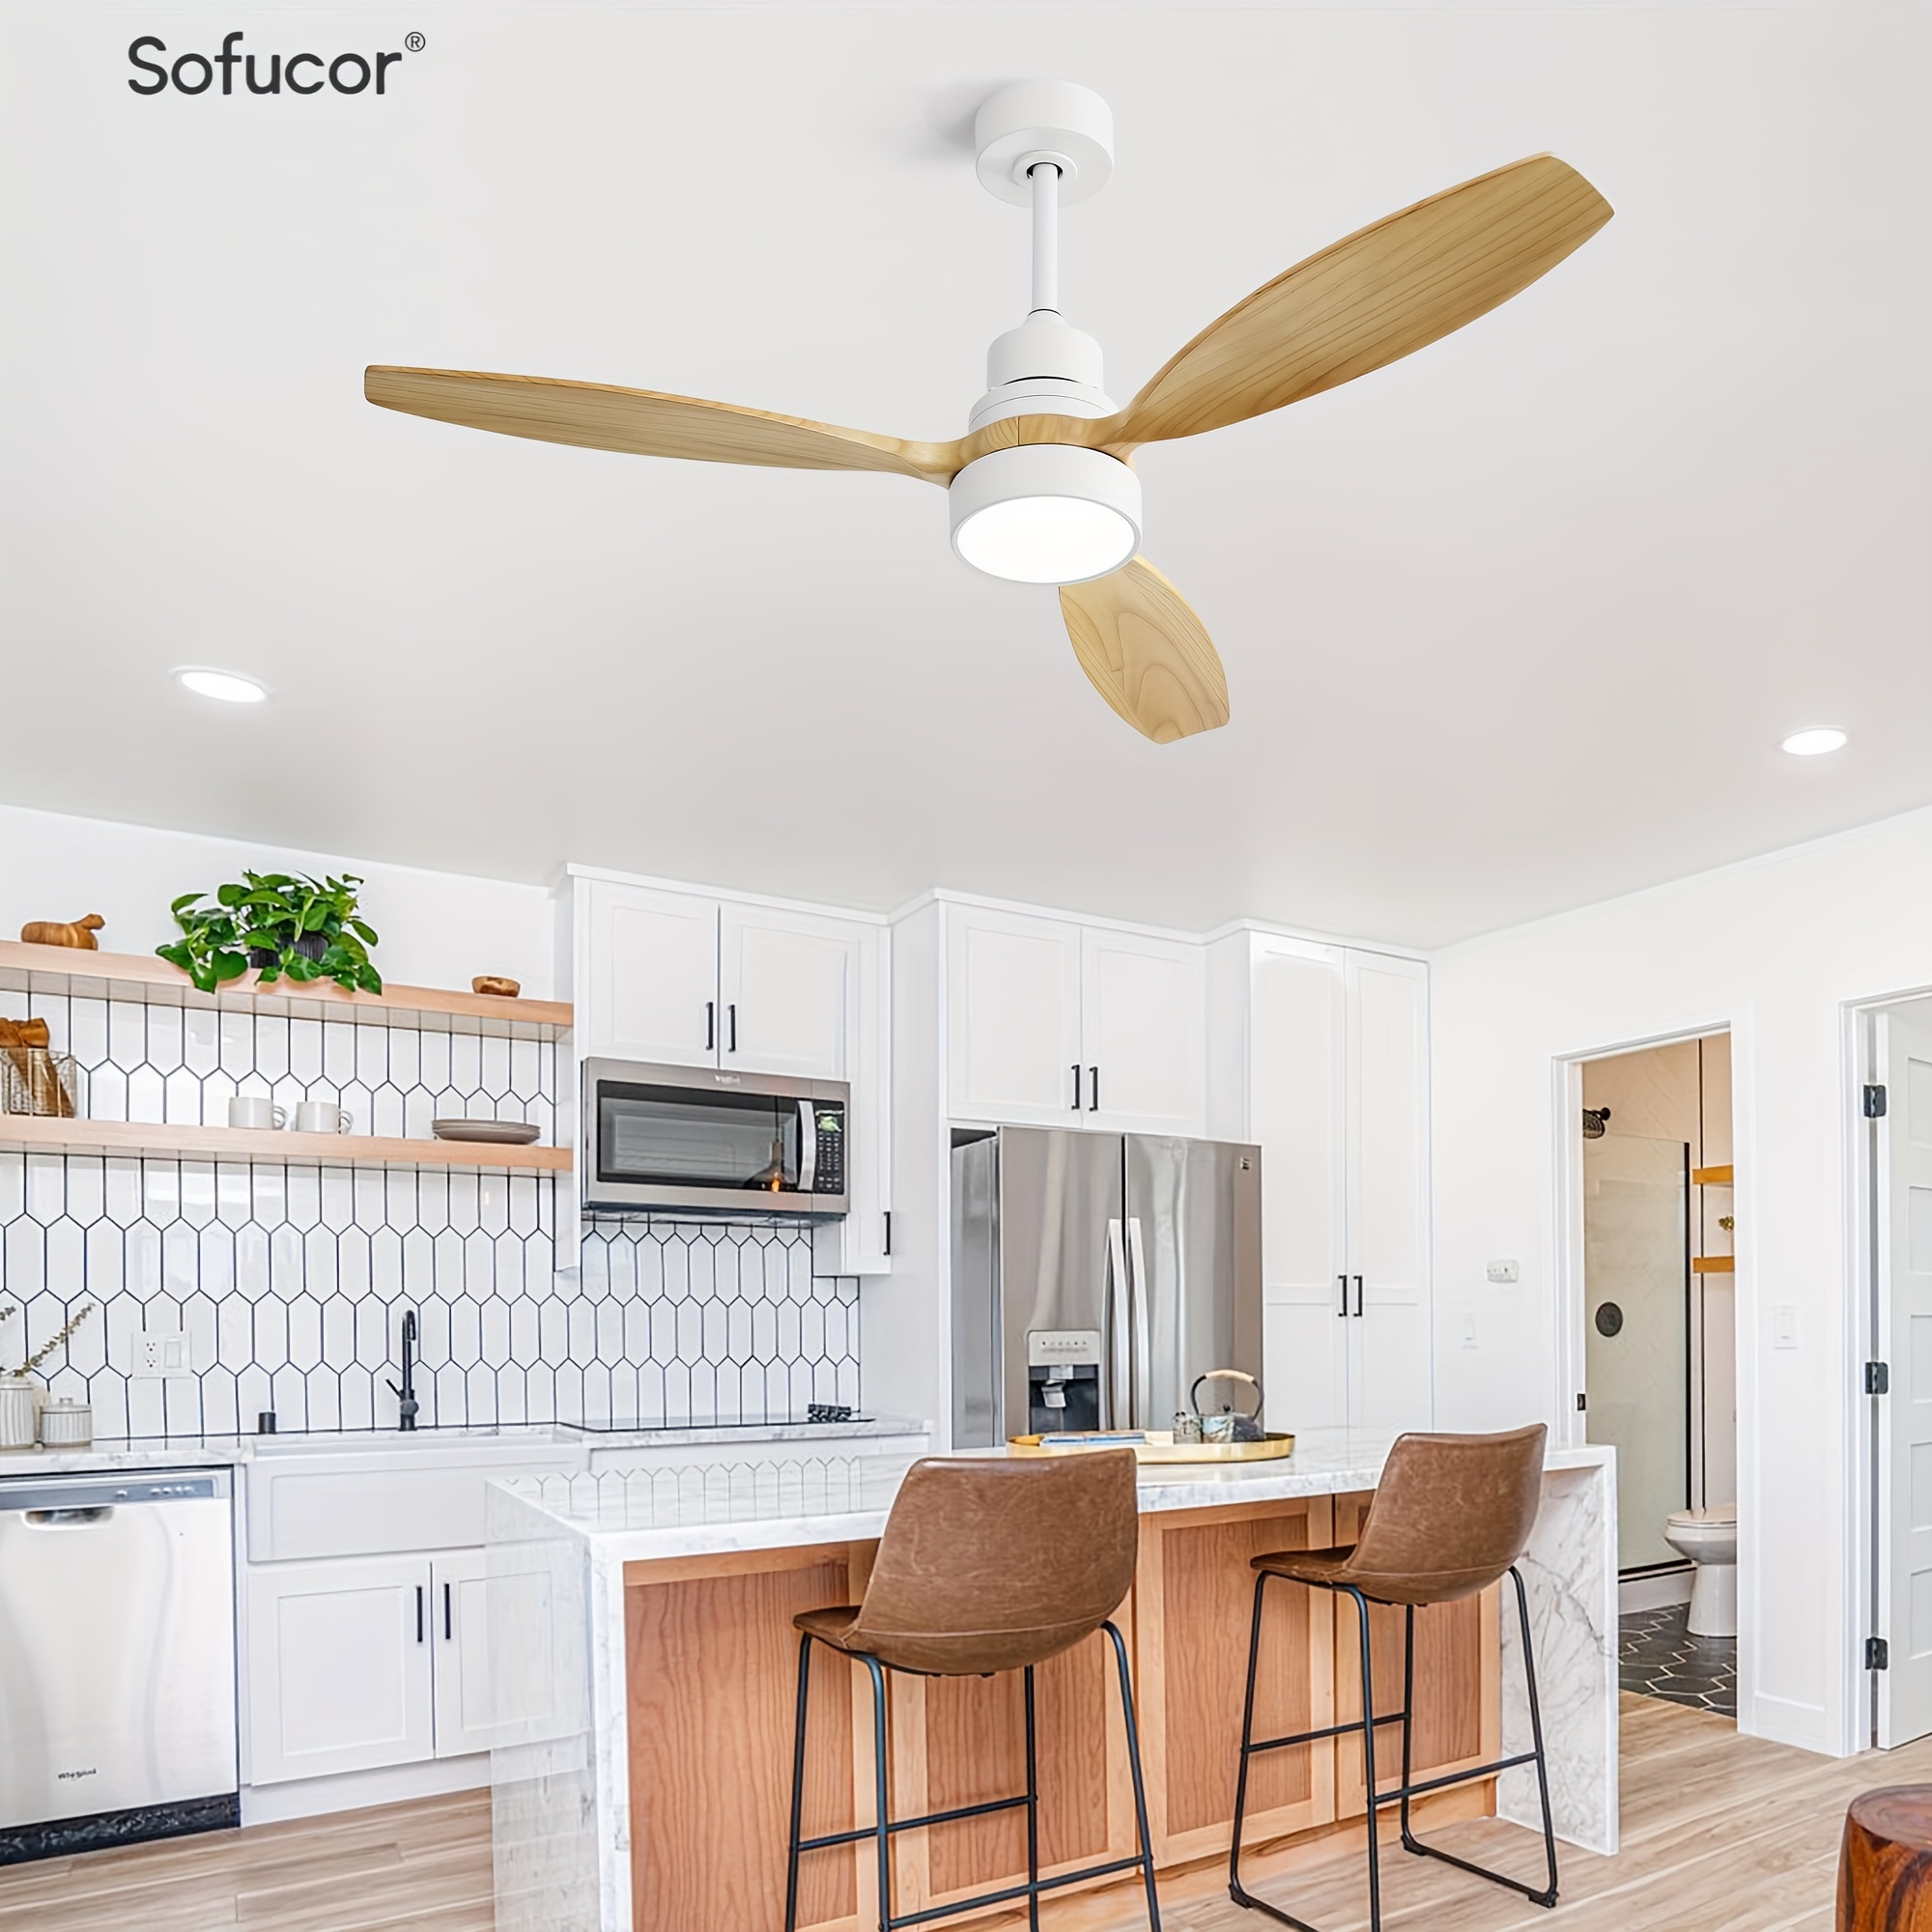 

Sofucor 52" Ceiling Fan With Lights Remote Control, 3 Poles For Indoor Outdoor Ceiling Fan With Remote, Wood Ceiling Fan With 3 Color Temperature, Light Wood & White Downrod